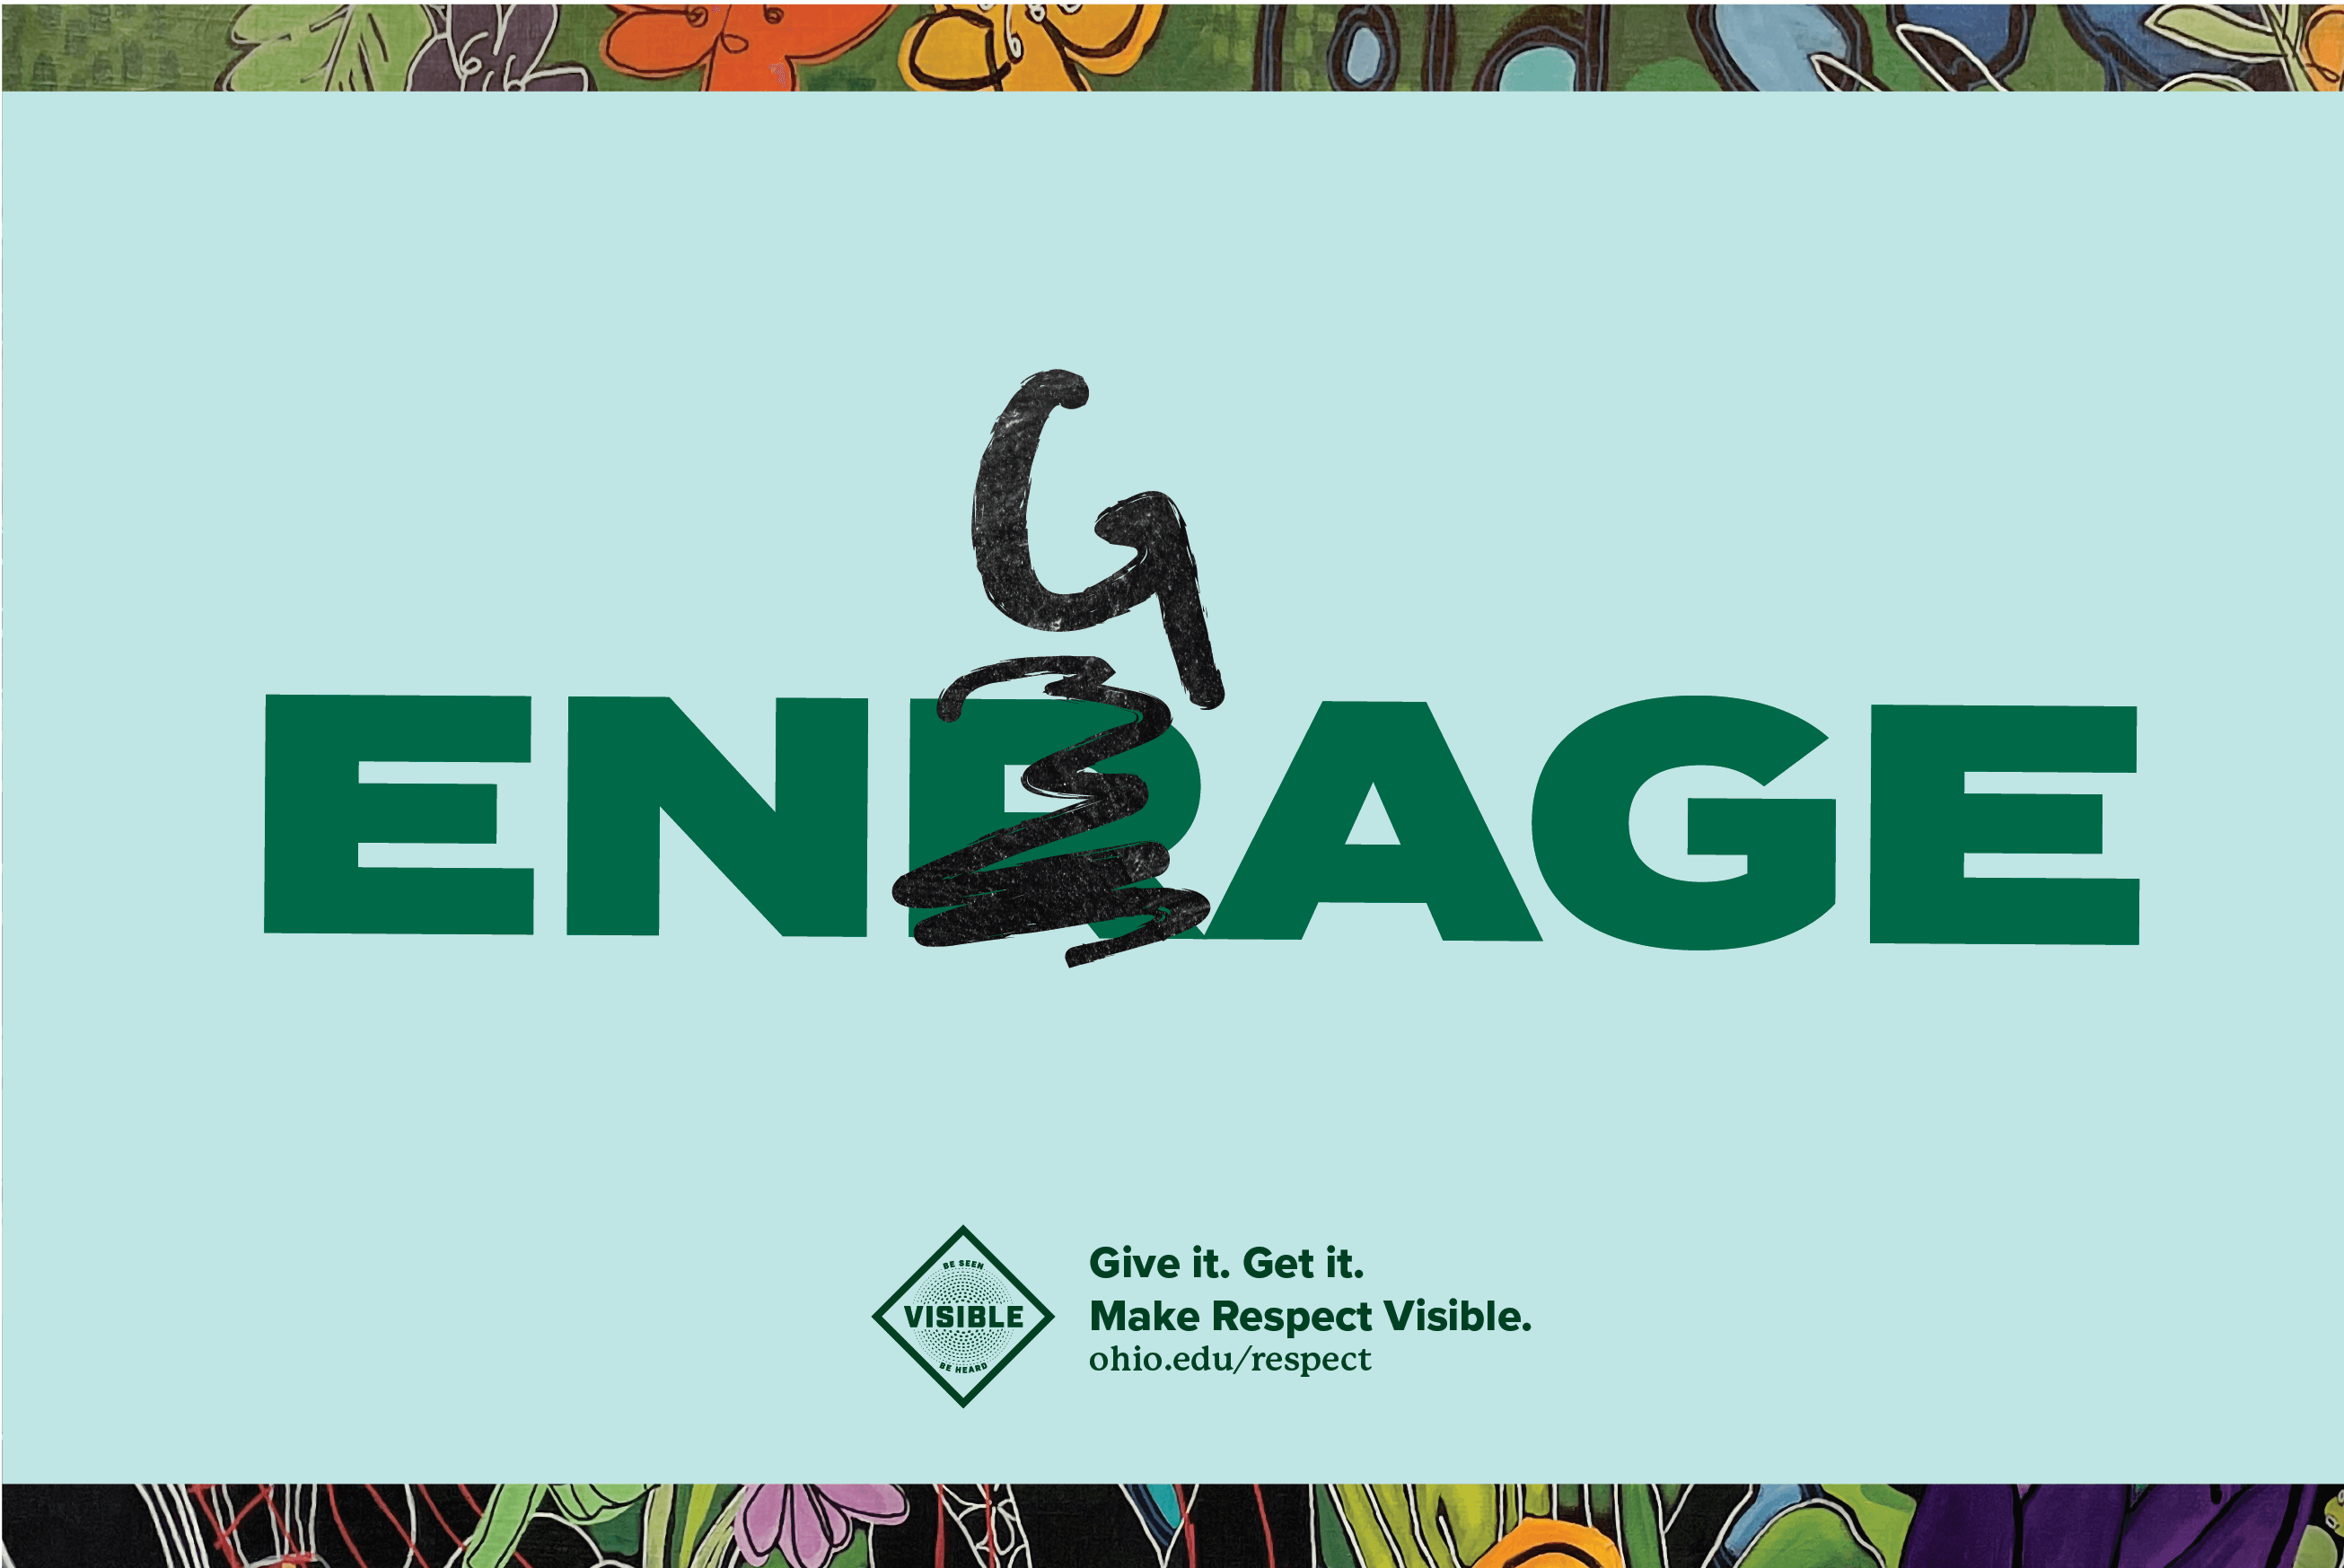 Image of the Engage Make Respect Visible poster